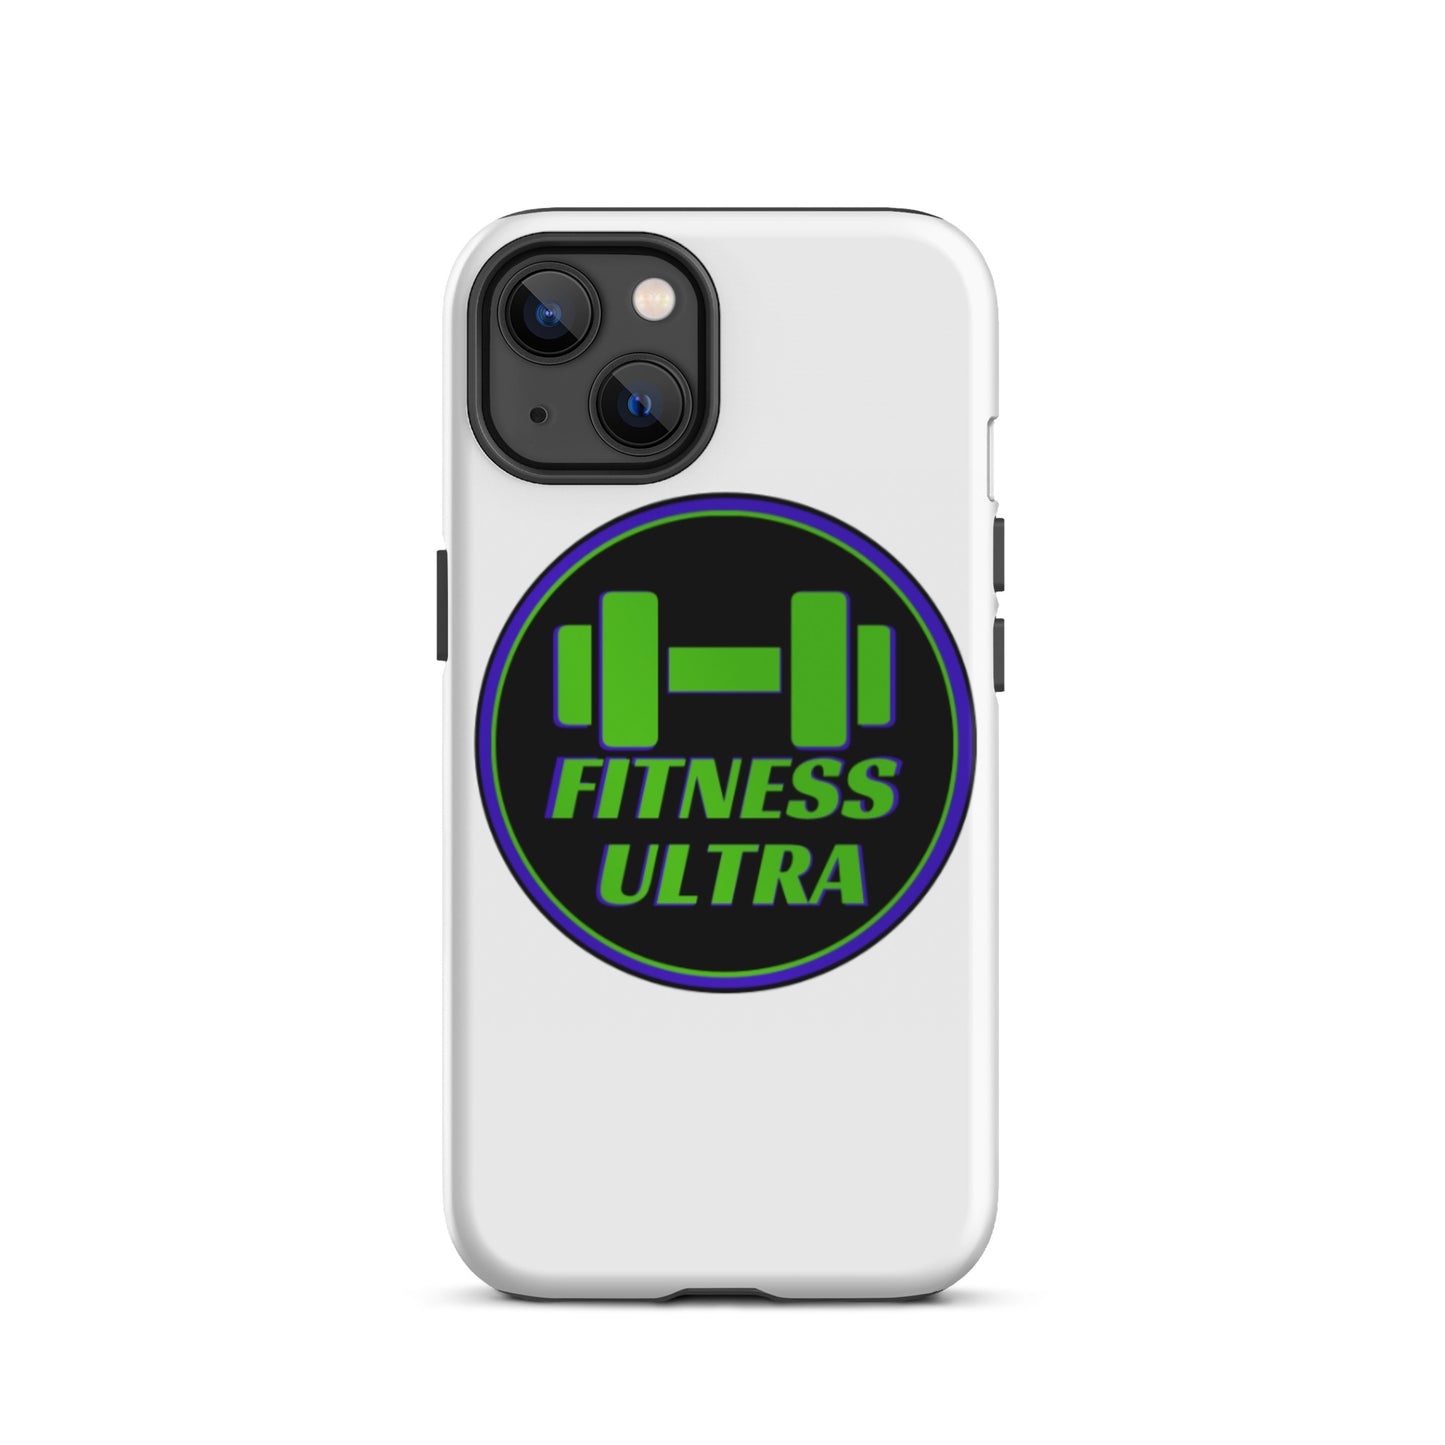 FitnessUltra iPhone case